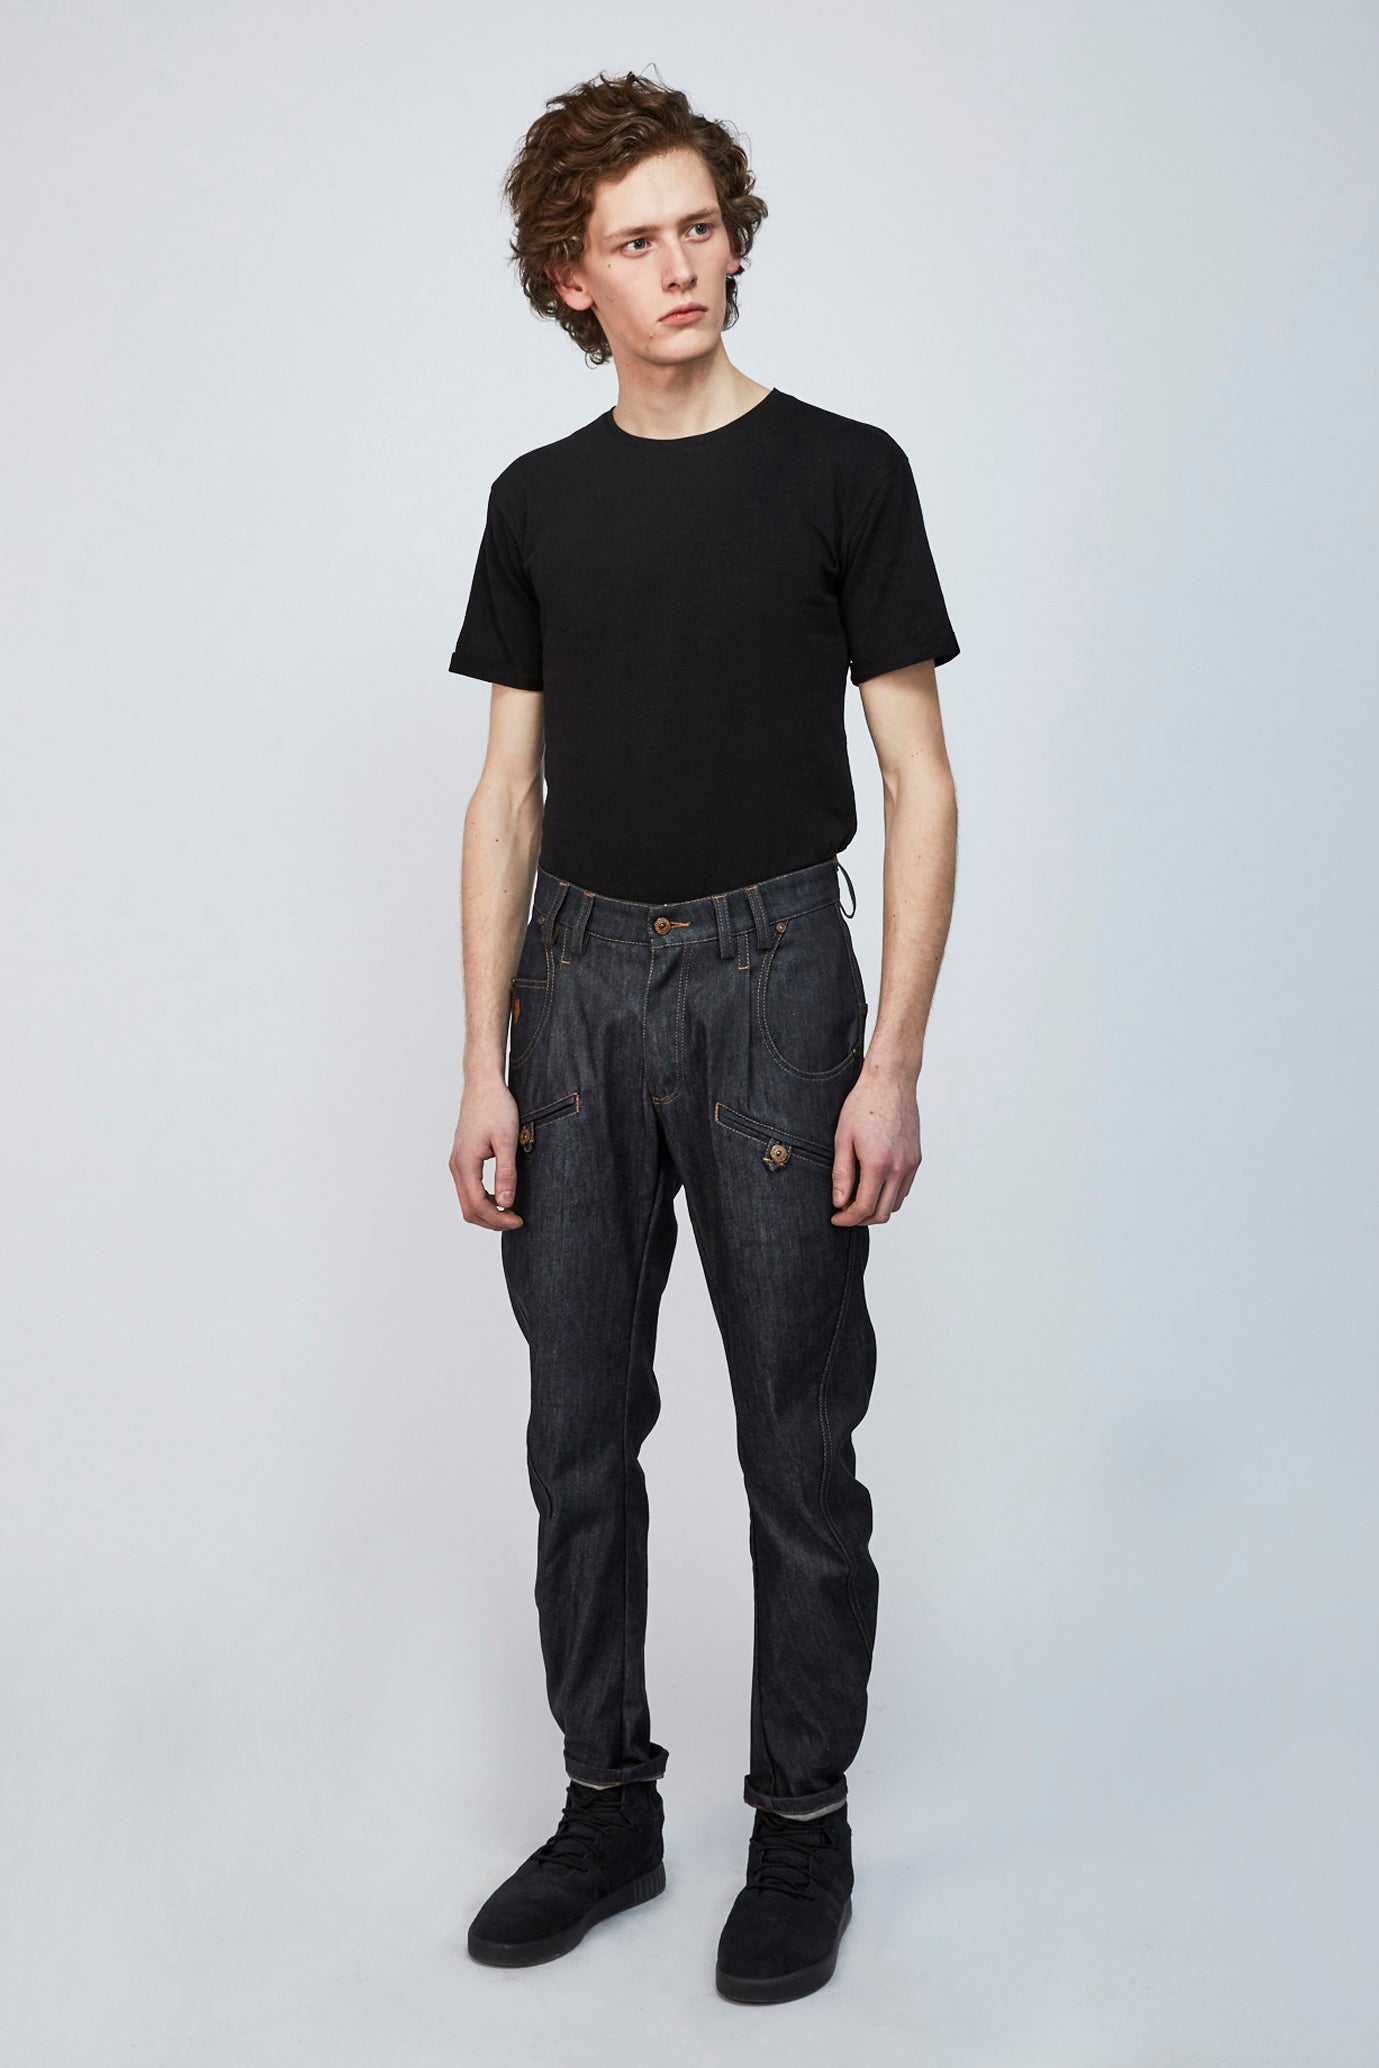 ADVANCED NEW unisex jeans - One Wolf